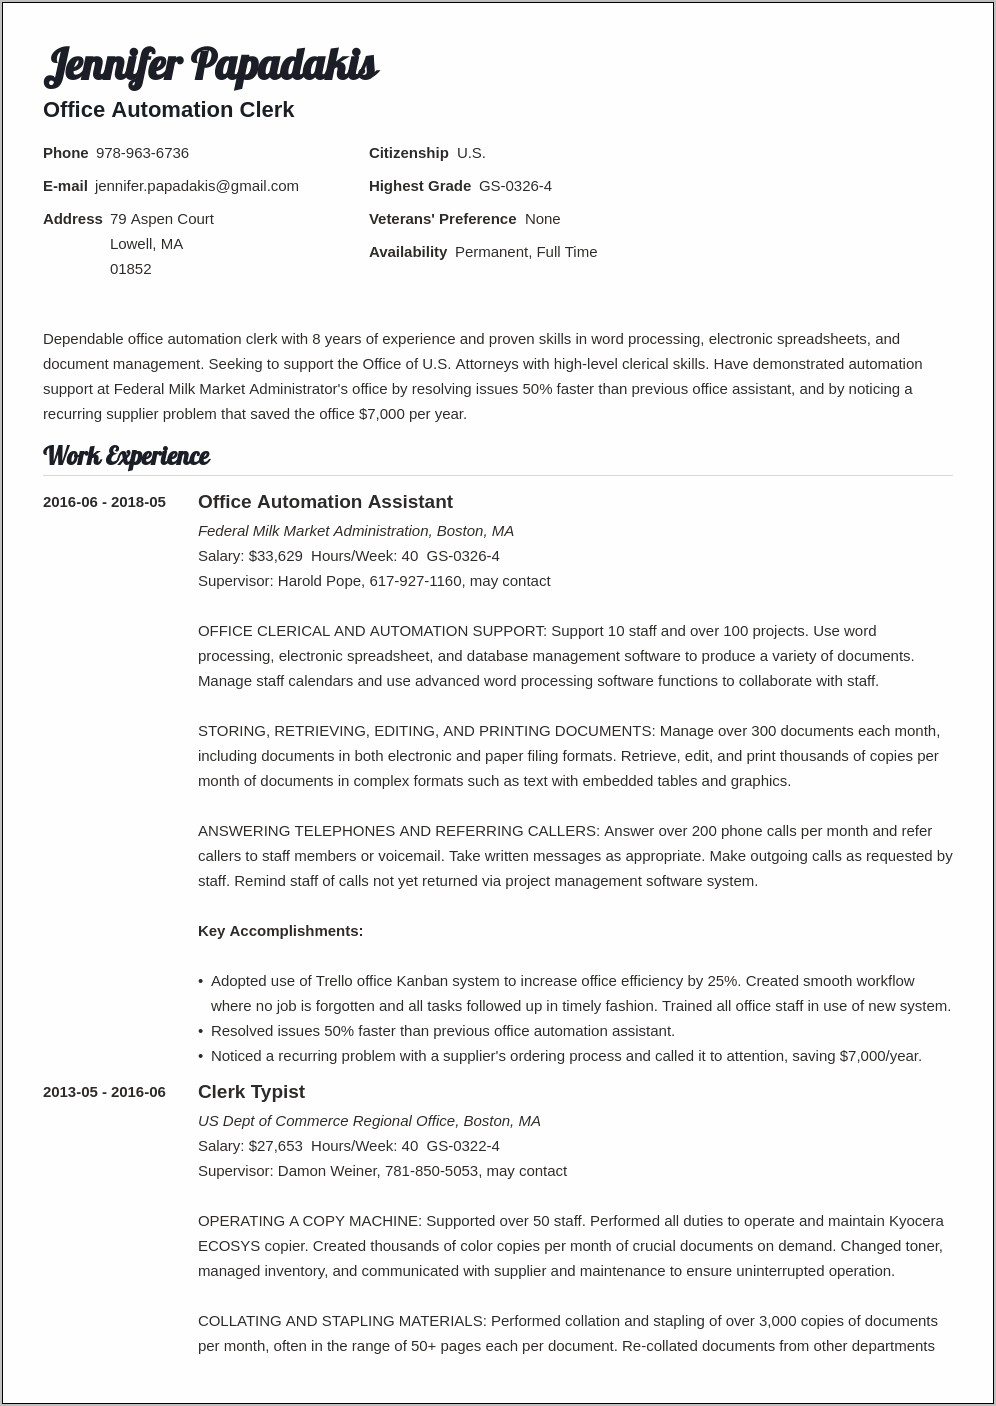 Best Resume Format To Upload To Usa Jobs